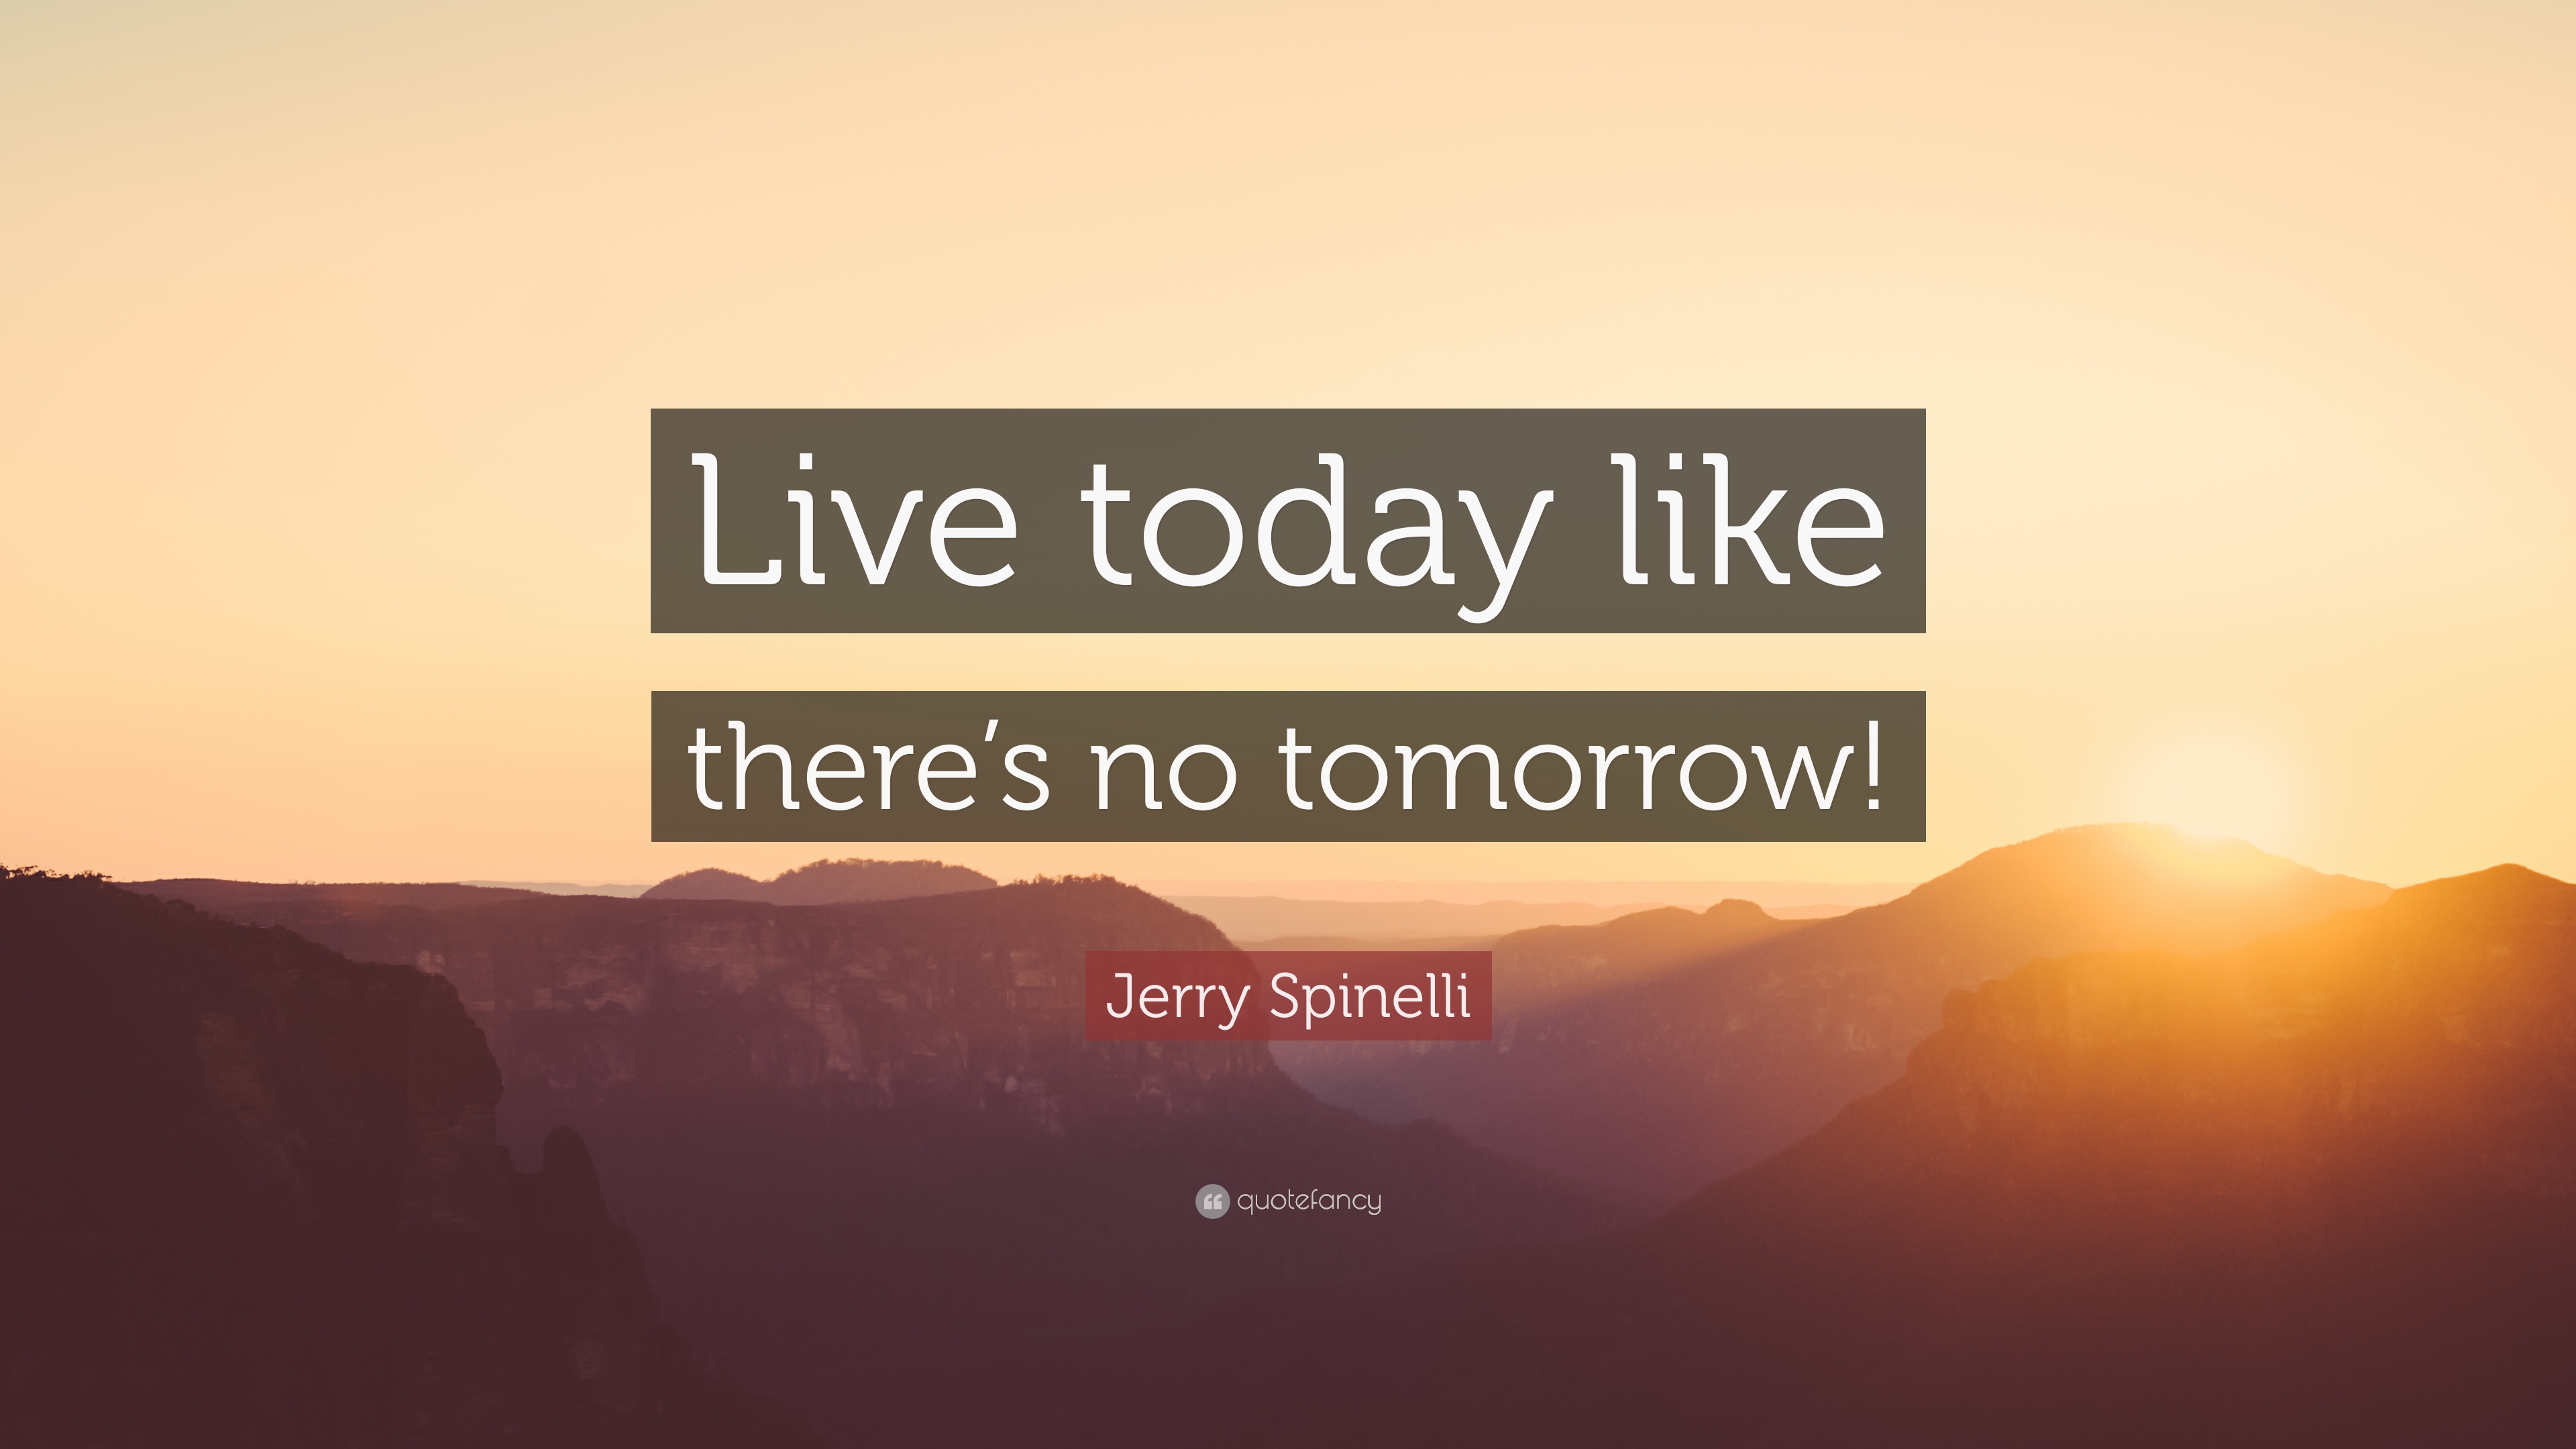 Jerry Spinelli Quote: “Live today like there's no tomorrow!”